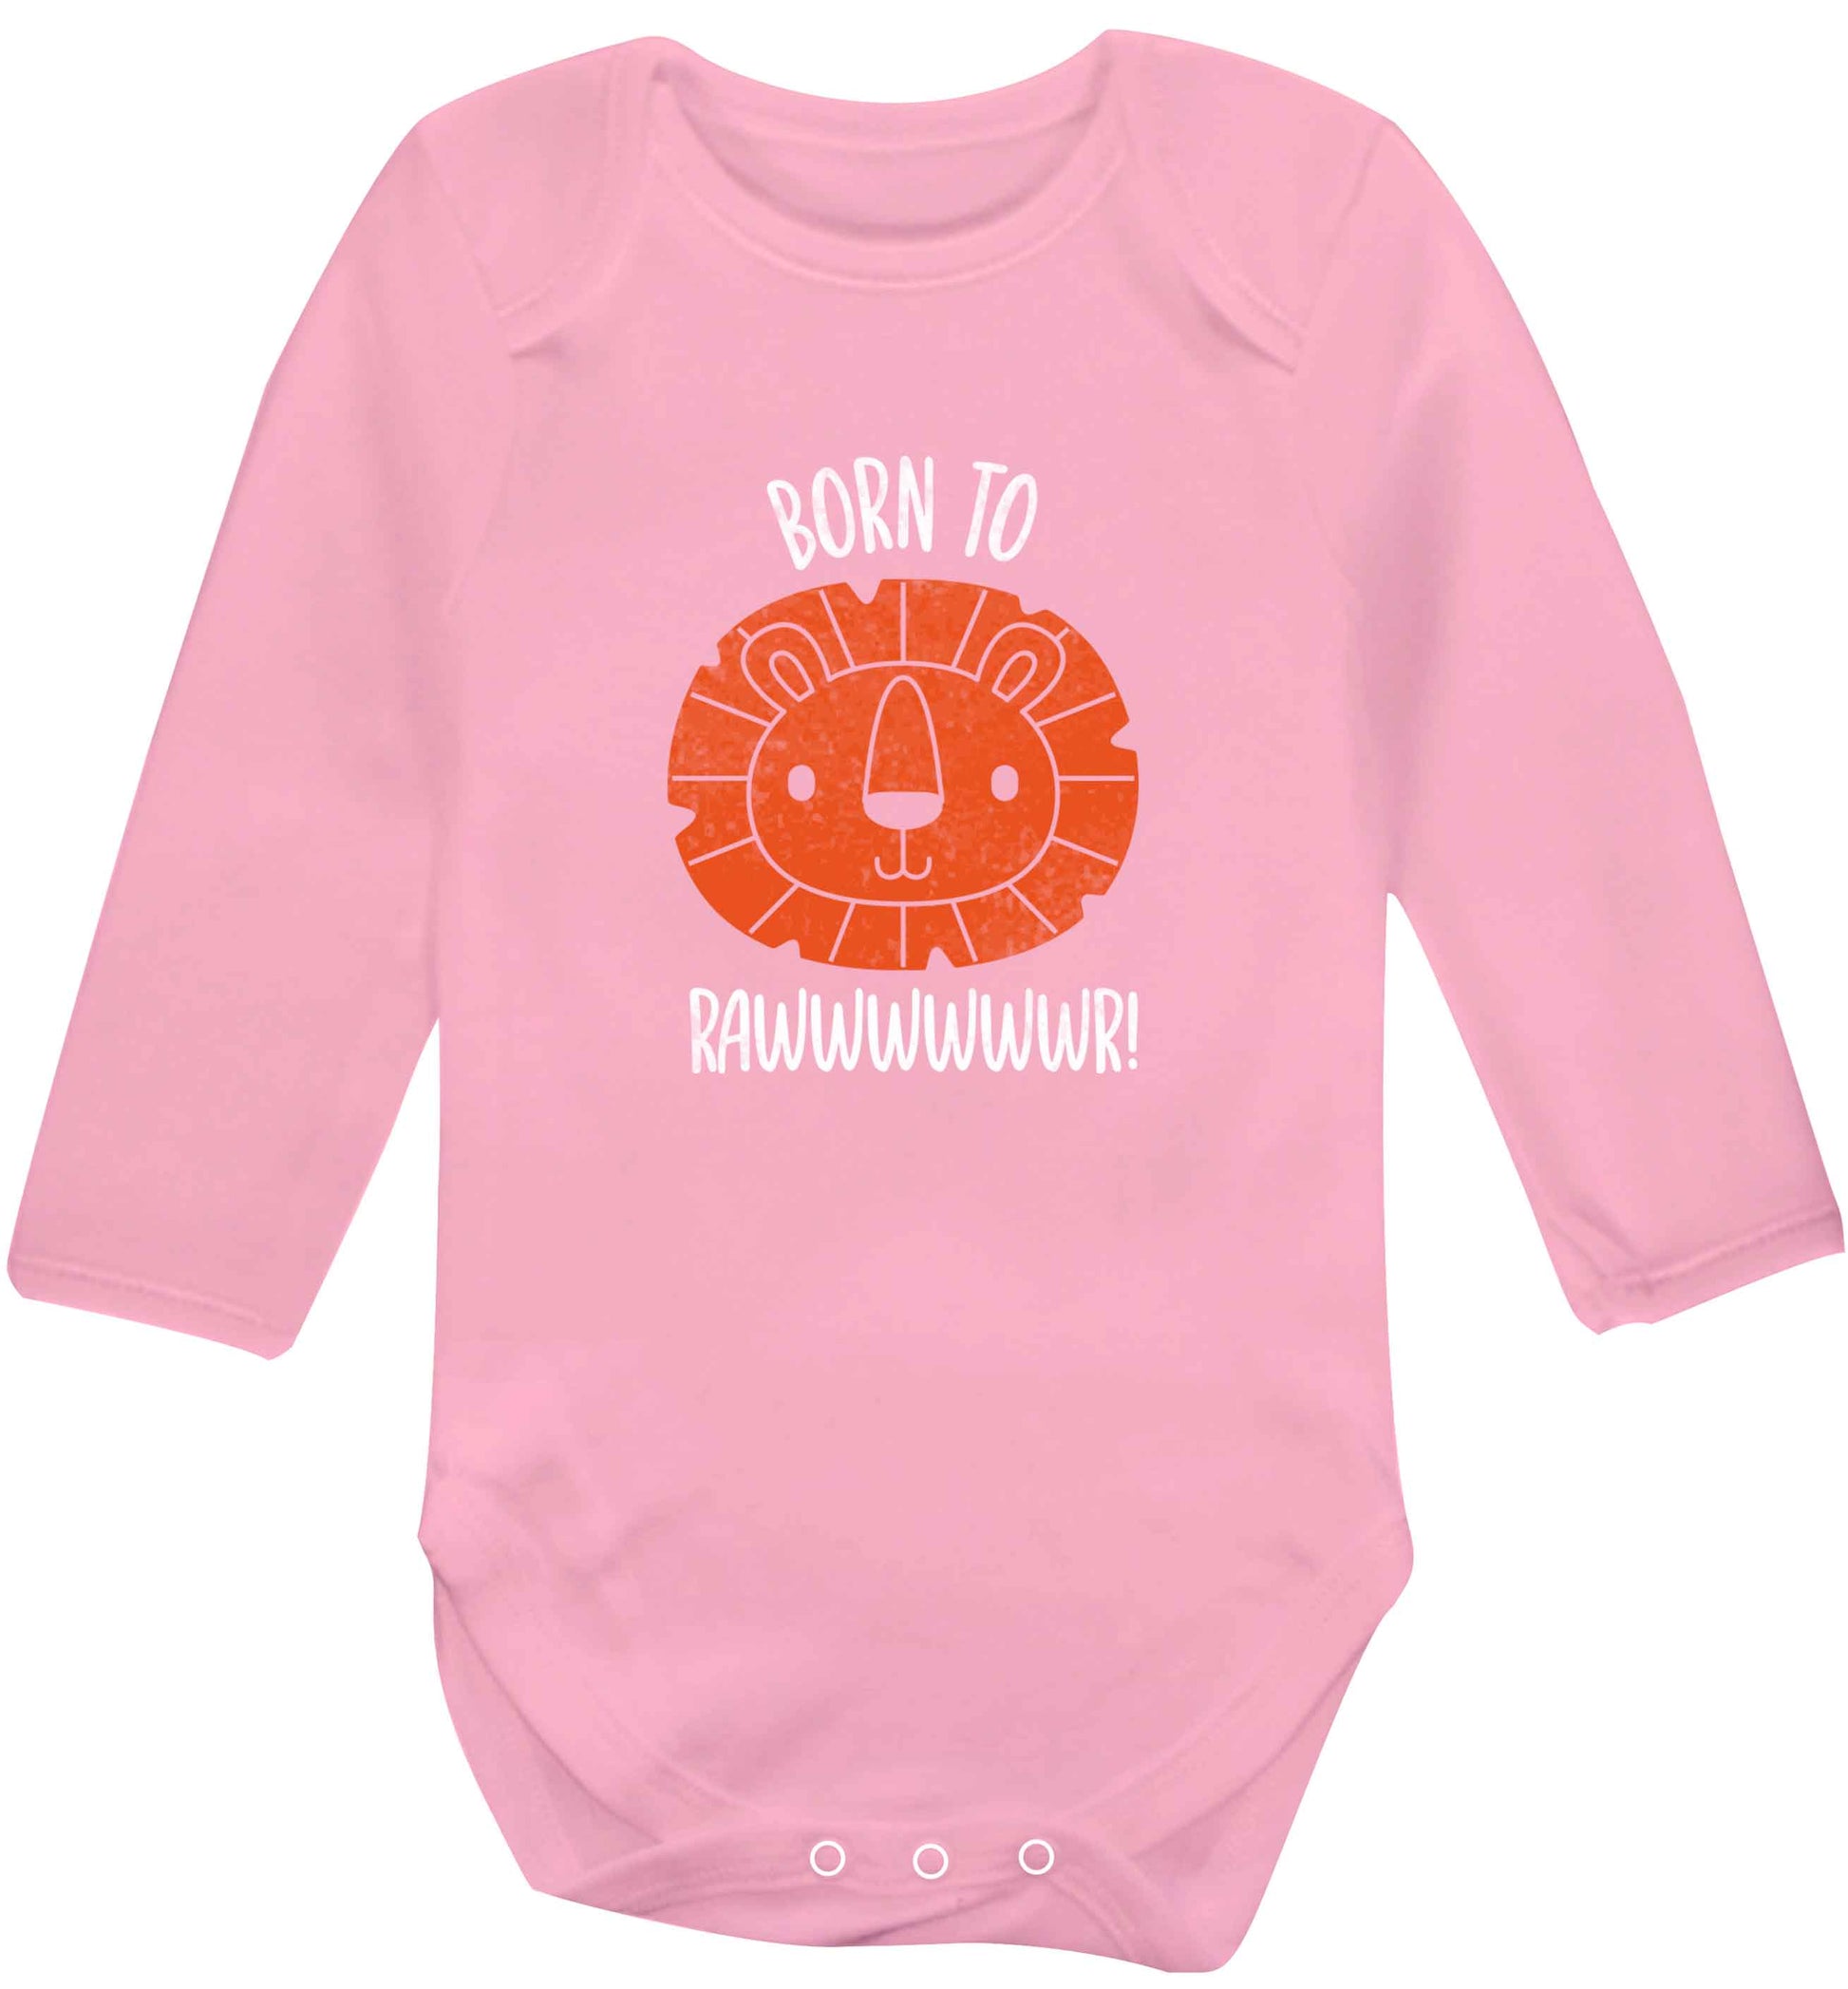 Born to rawr baby vest long sleeved pale pink 6-12 months